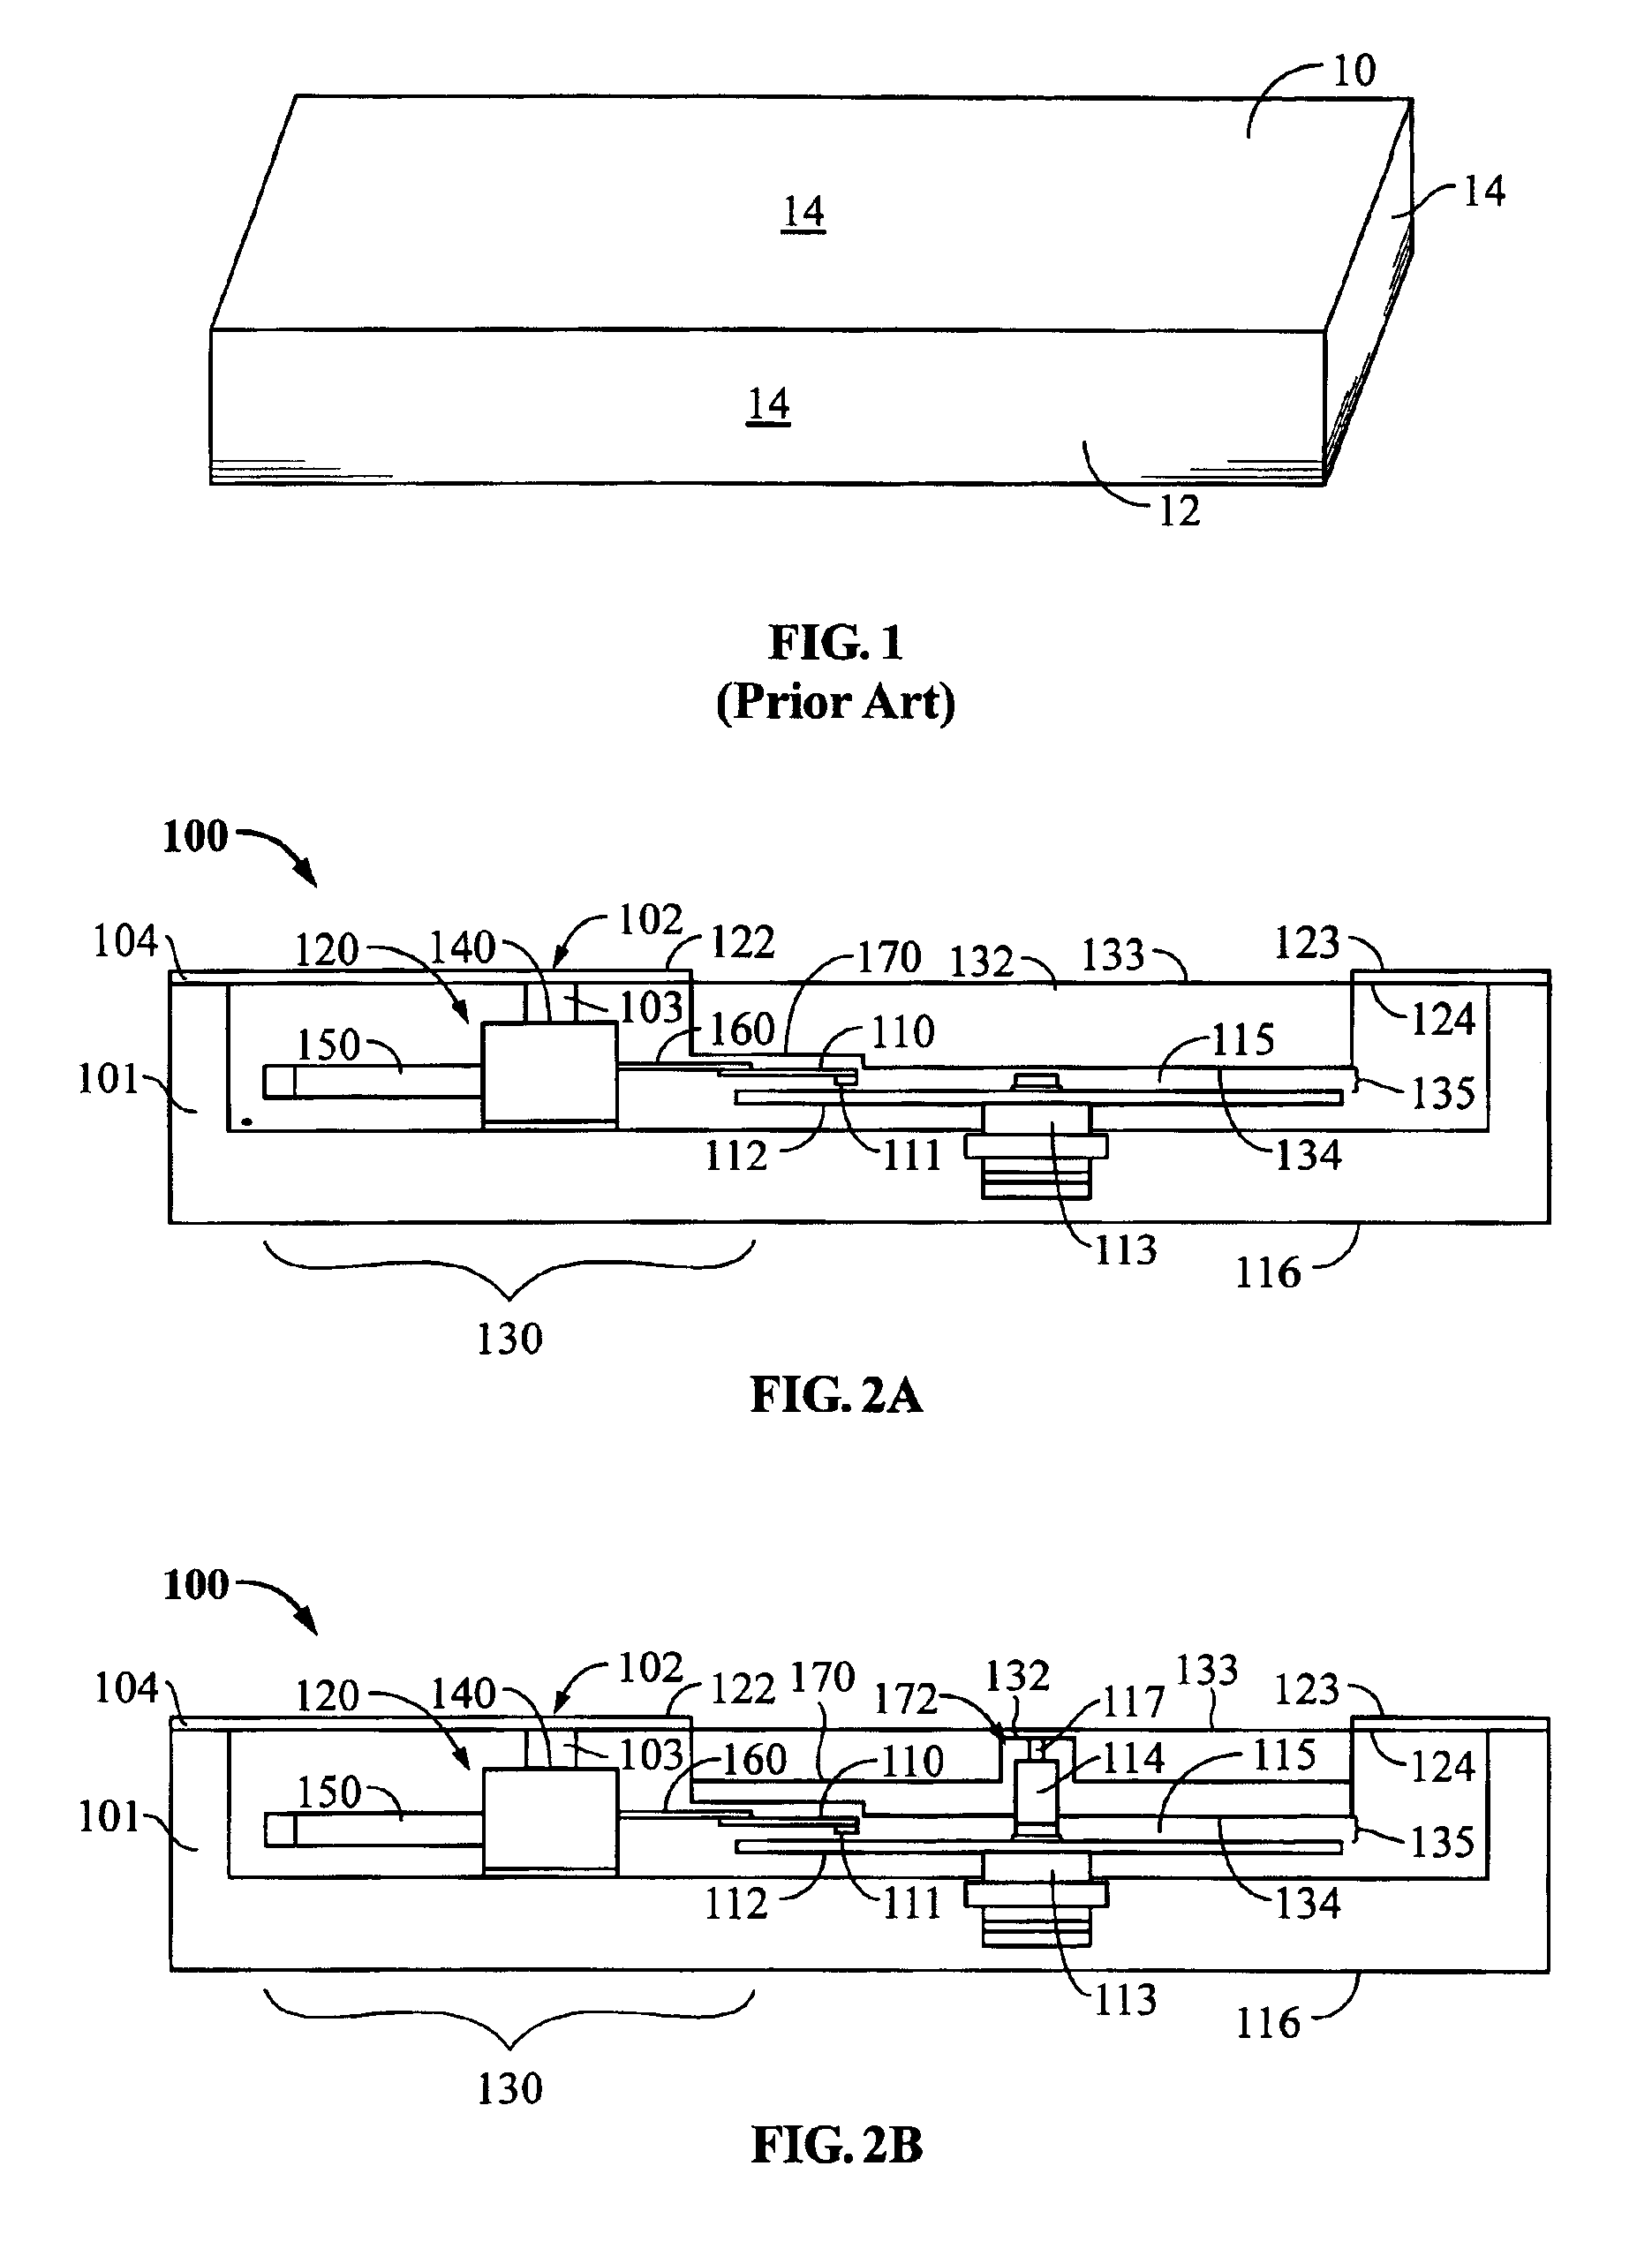 Disk drive cover for use with a disk drive to provide for disk shrouding and heat dissipation